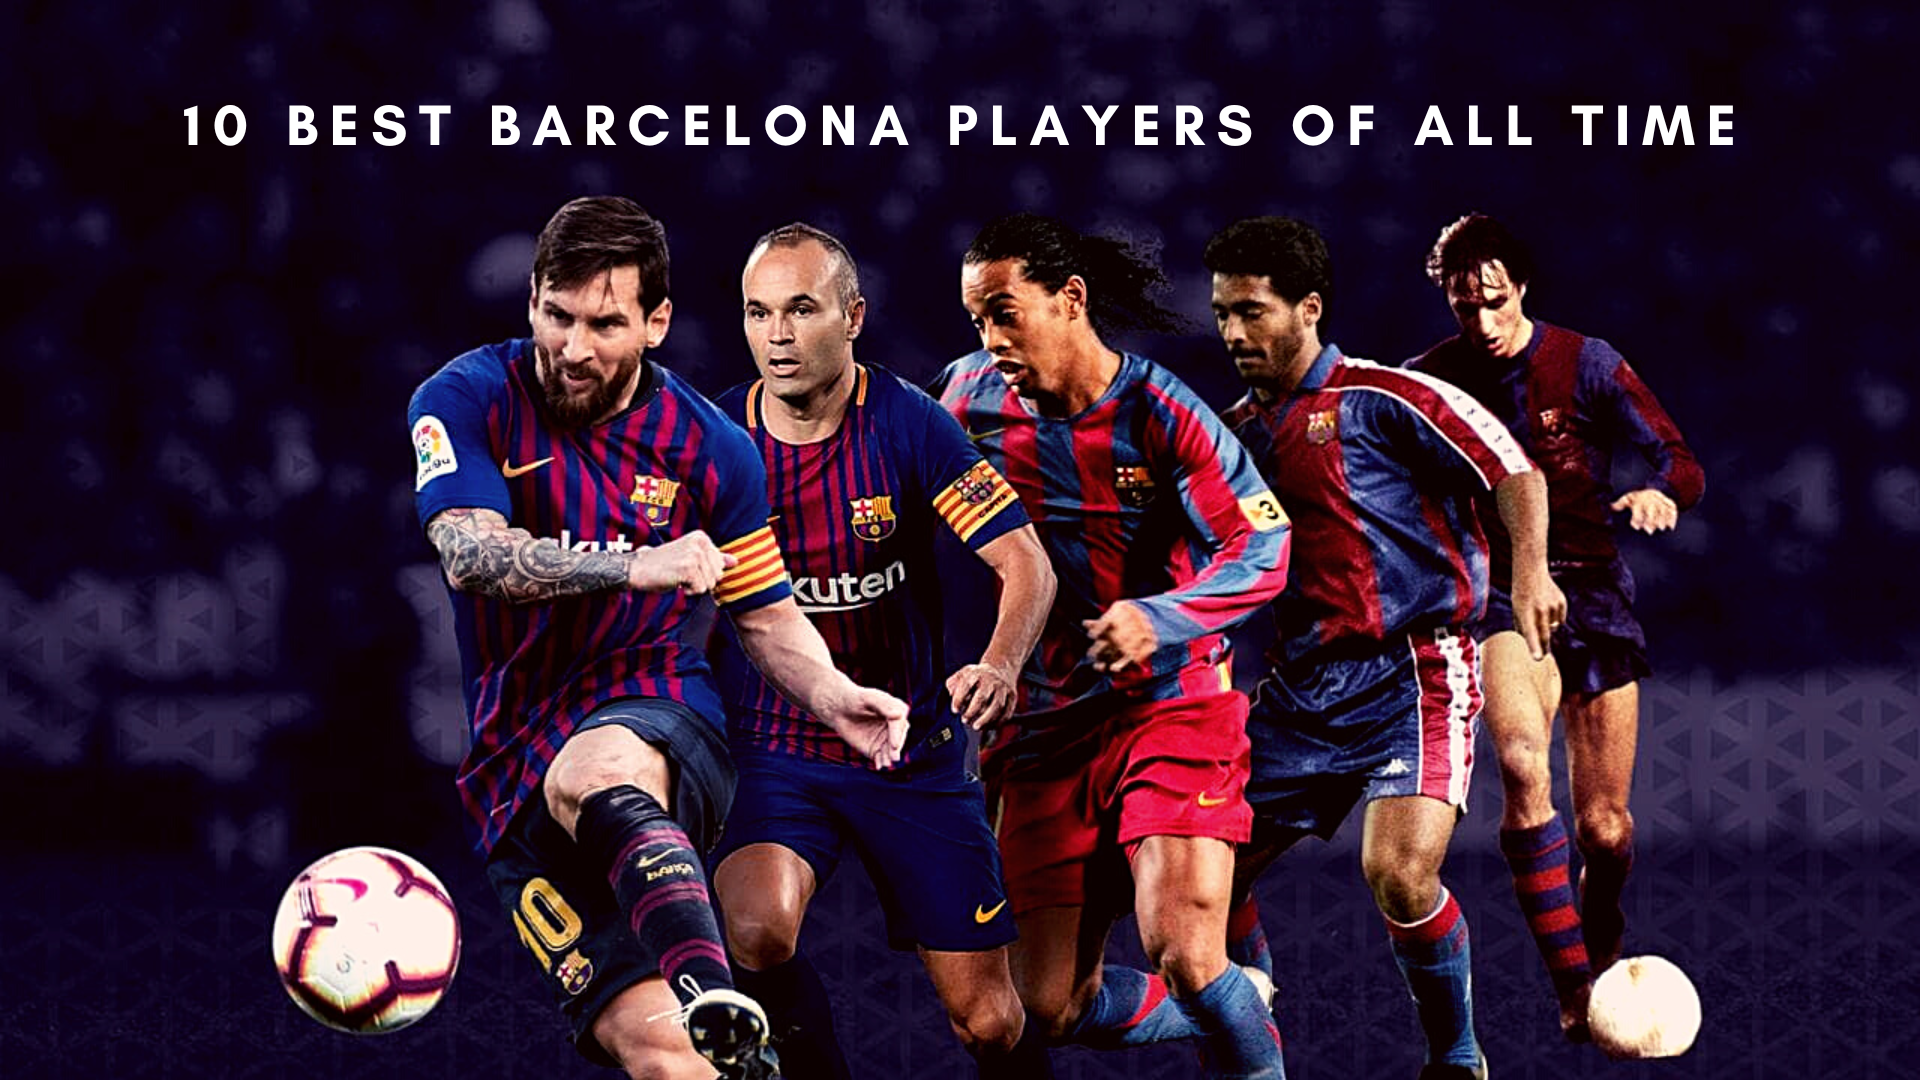 Here is a list of top 10 Barcelona players of all time. (Picture was taken from sportshubnet.com)